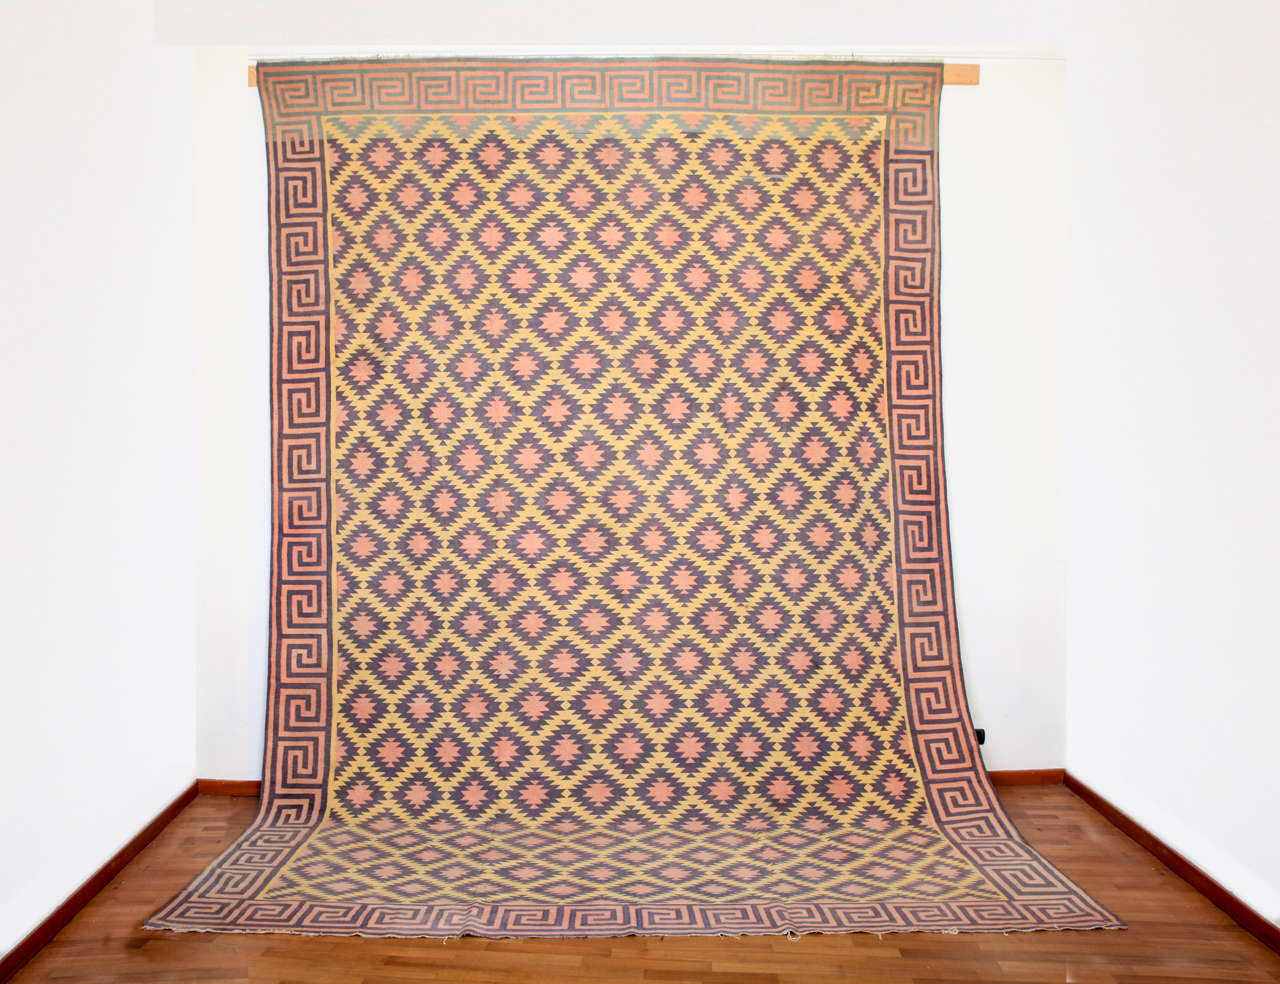 A rare example in a palace size woven on a lemon yellow background. Dhurries of these dimensions were often commissioned to adorn the grandiose rooms of the Maharajah palaces in Rajasthan.